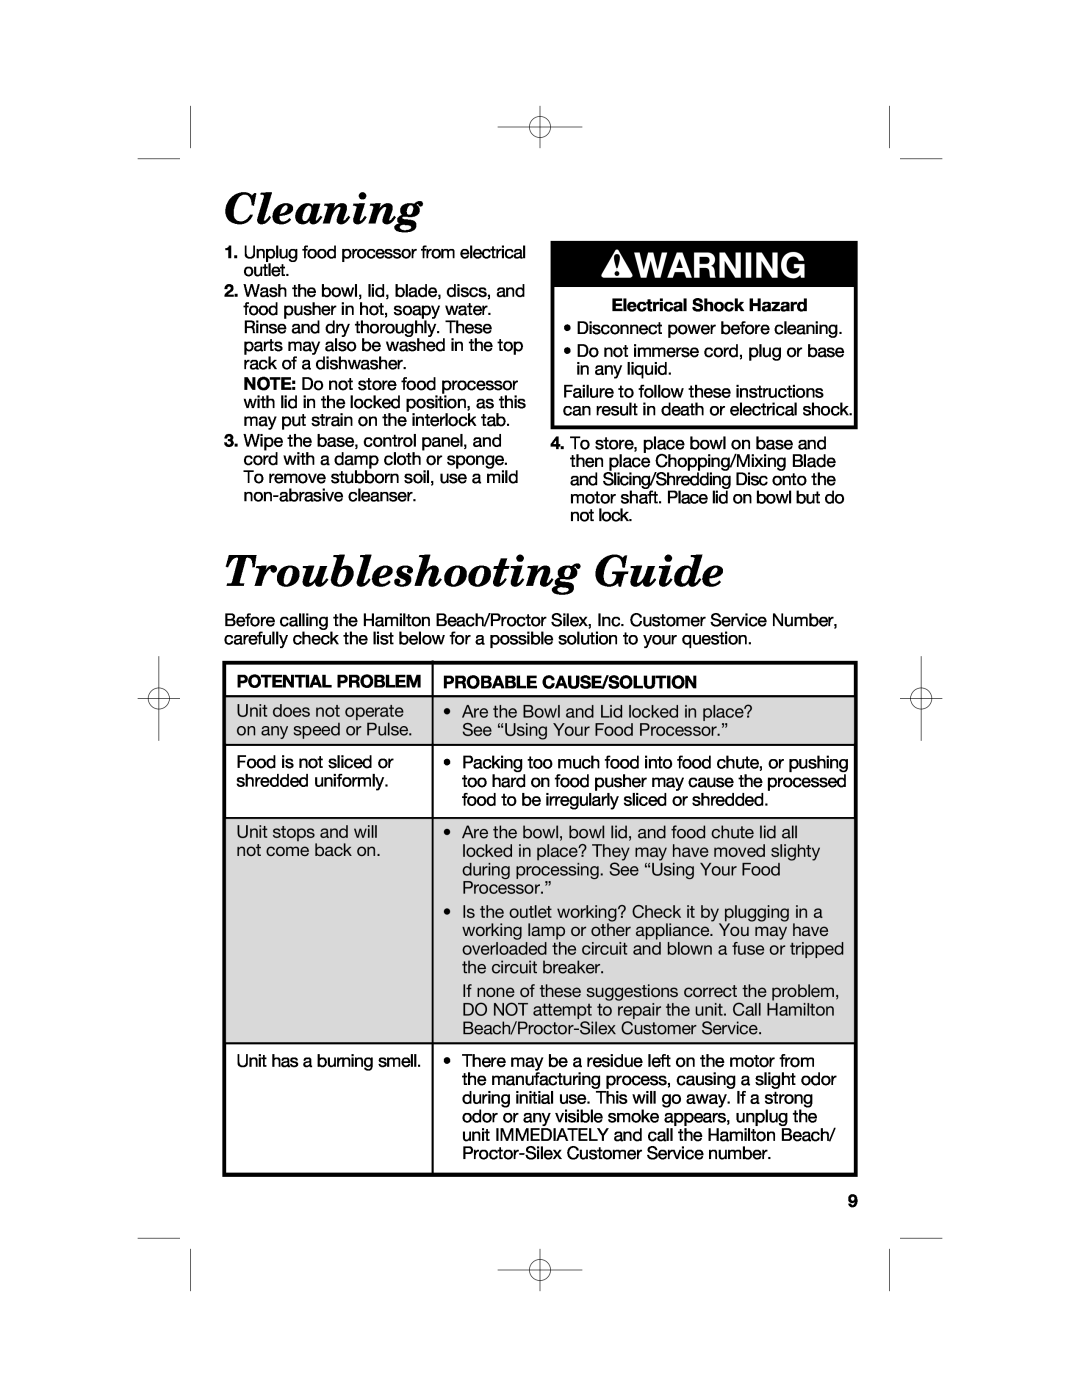 Hamilton Beach 70670, 70610 manual Cleaning, Troubleshooting Guide, wWARNING, Electrical Shock Hazard, Potential Problem 